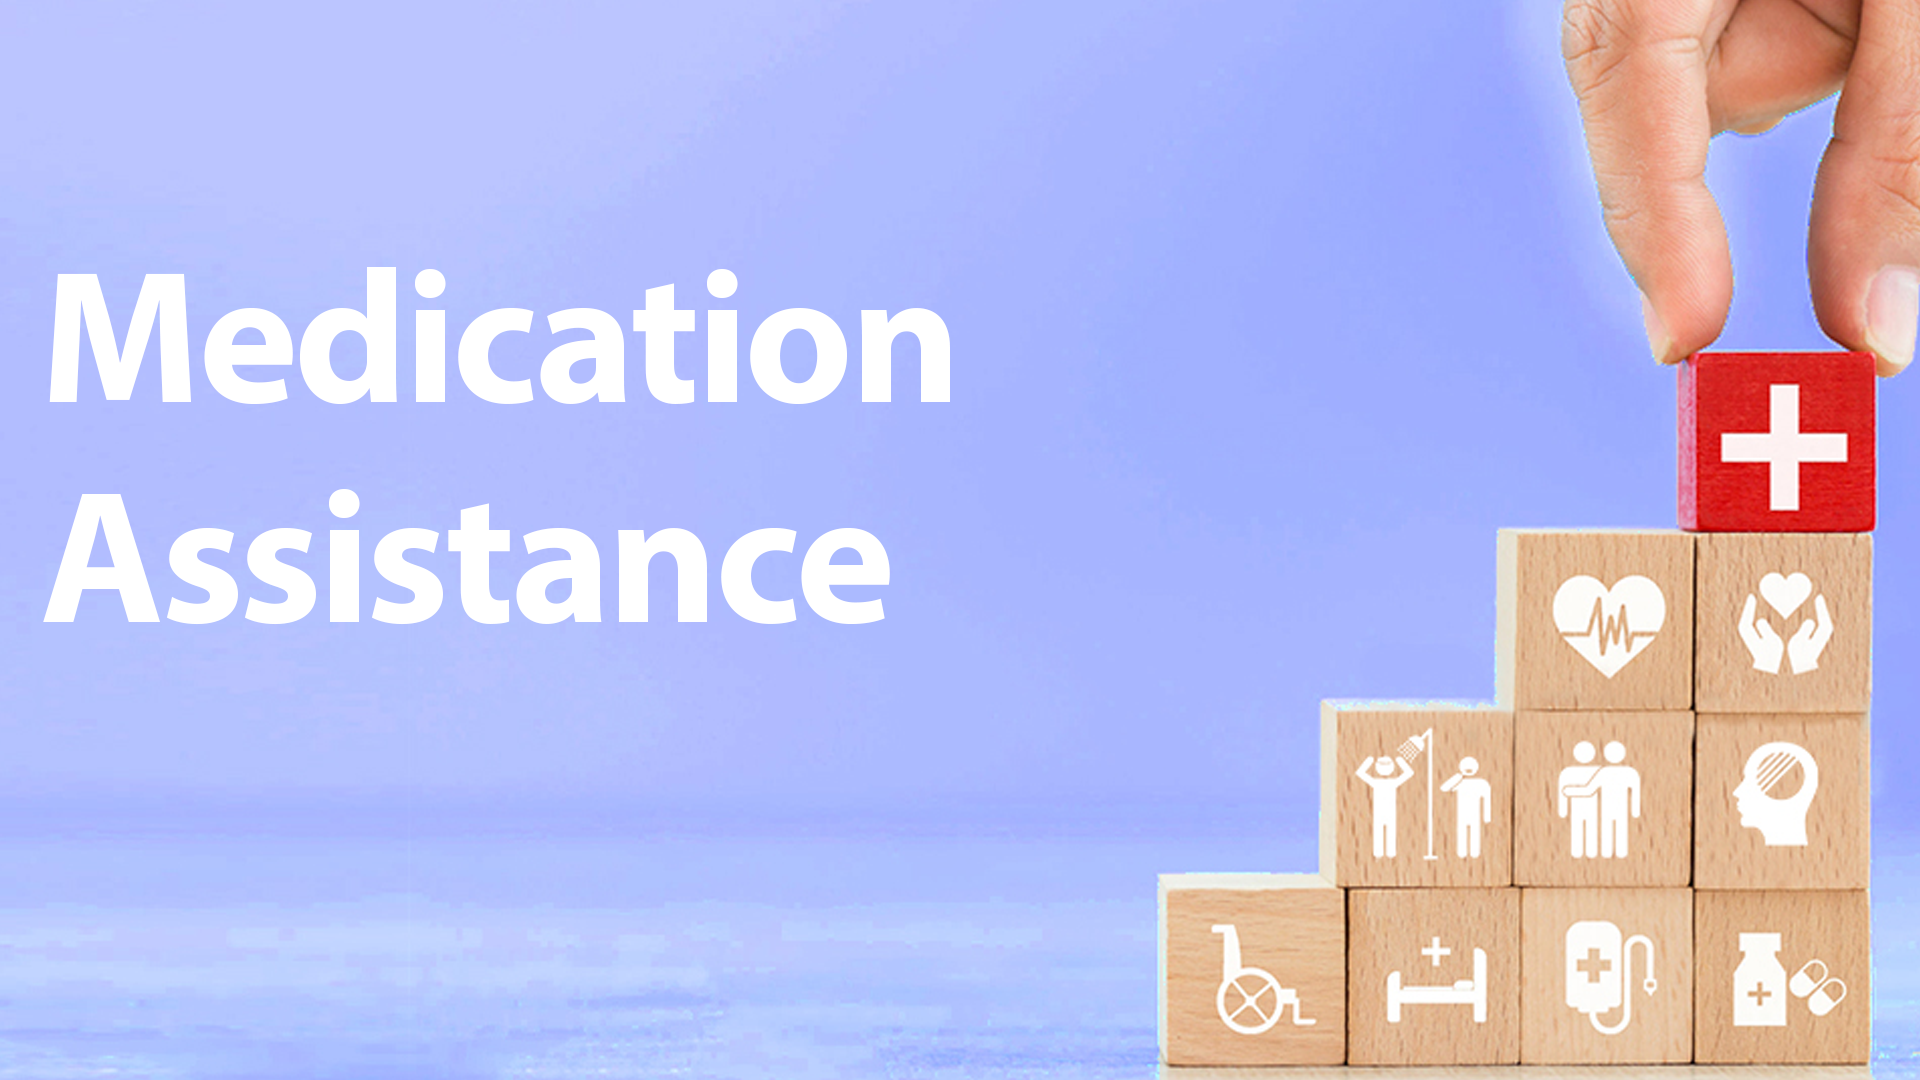 Medication Assistance | Care & Carers in Aylesbury